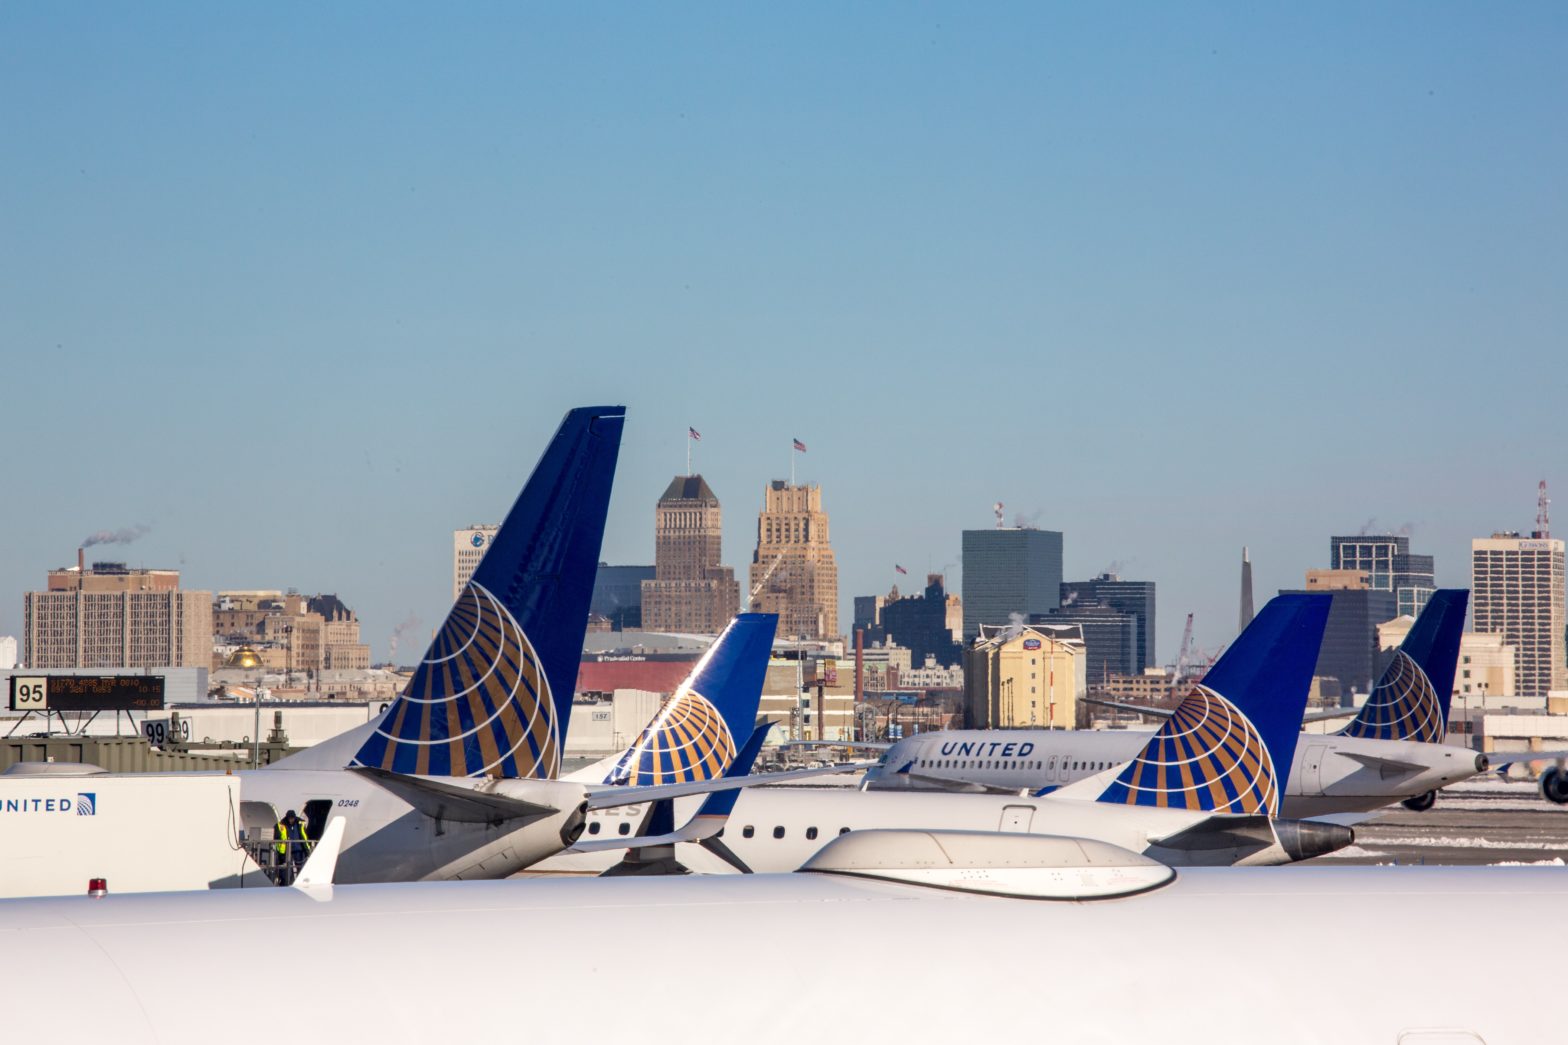 "Severe" Turbulence Rocks United Airlines Flight, Causing Injuries